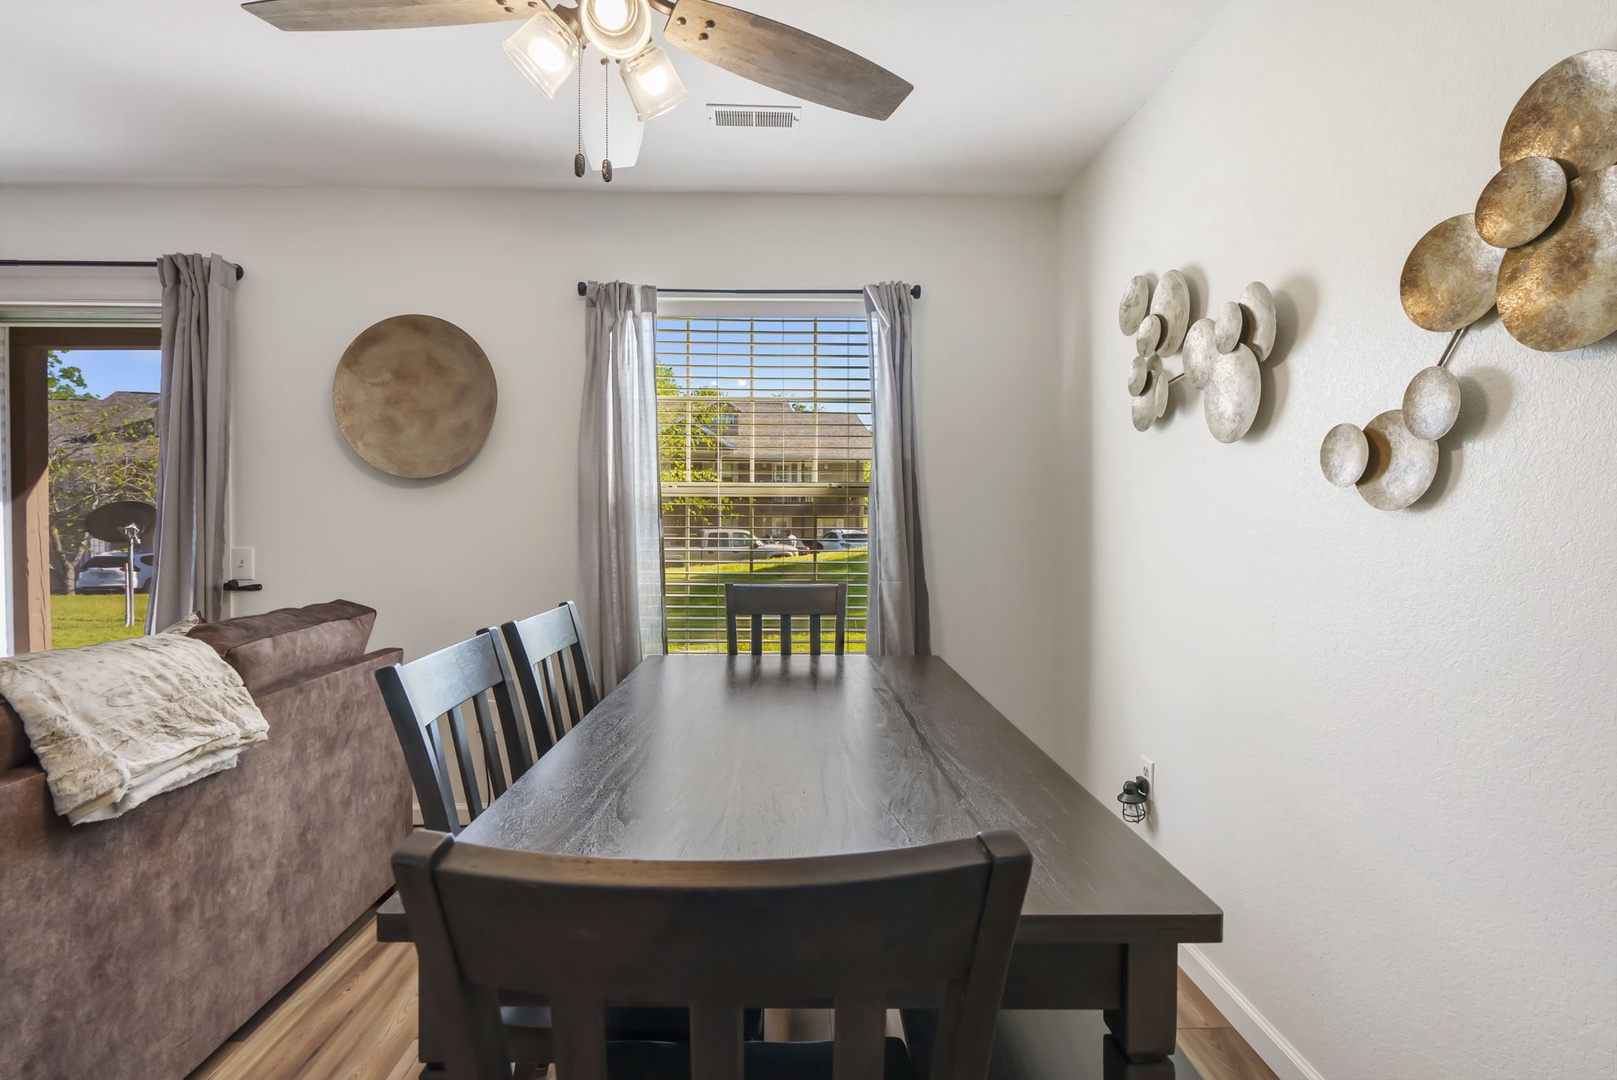 Spend time visiting and enjoying meals together at the Dining Table, with seating for 6